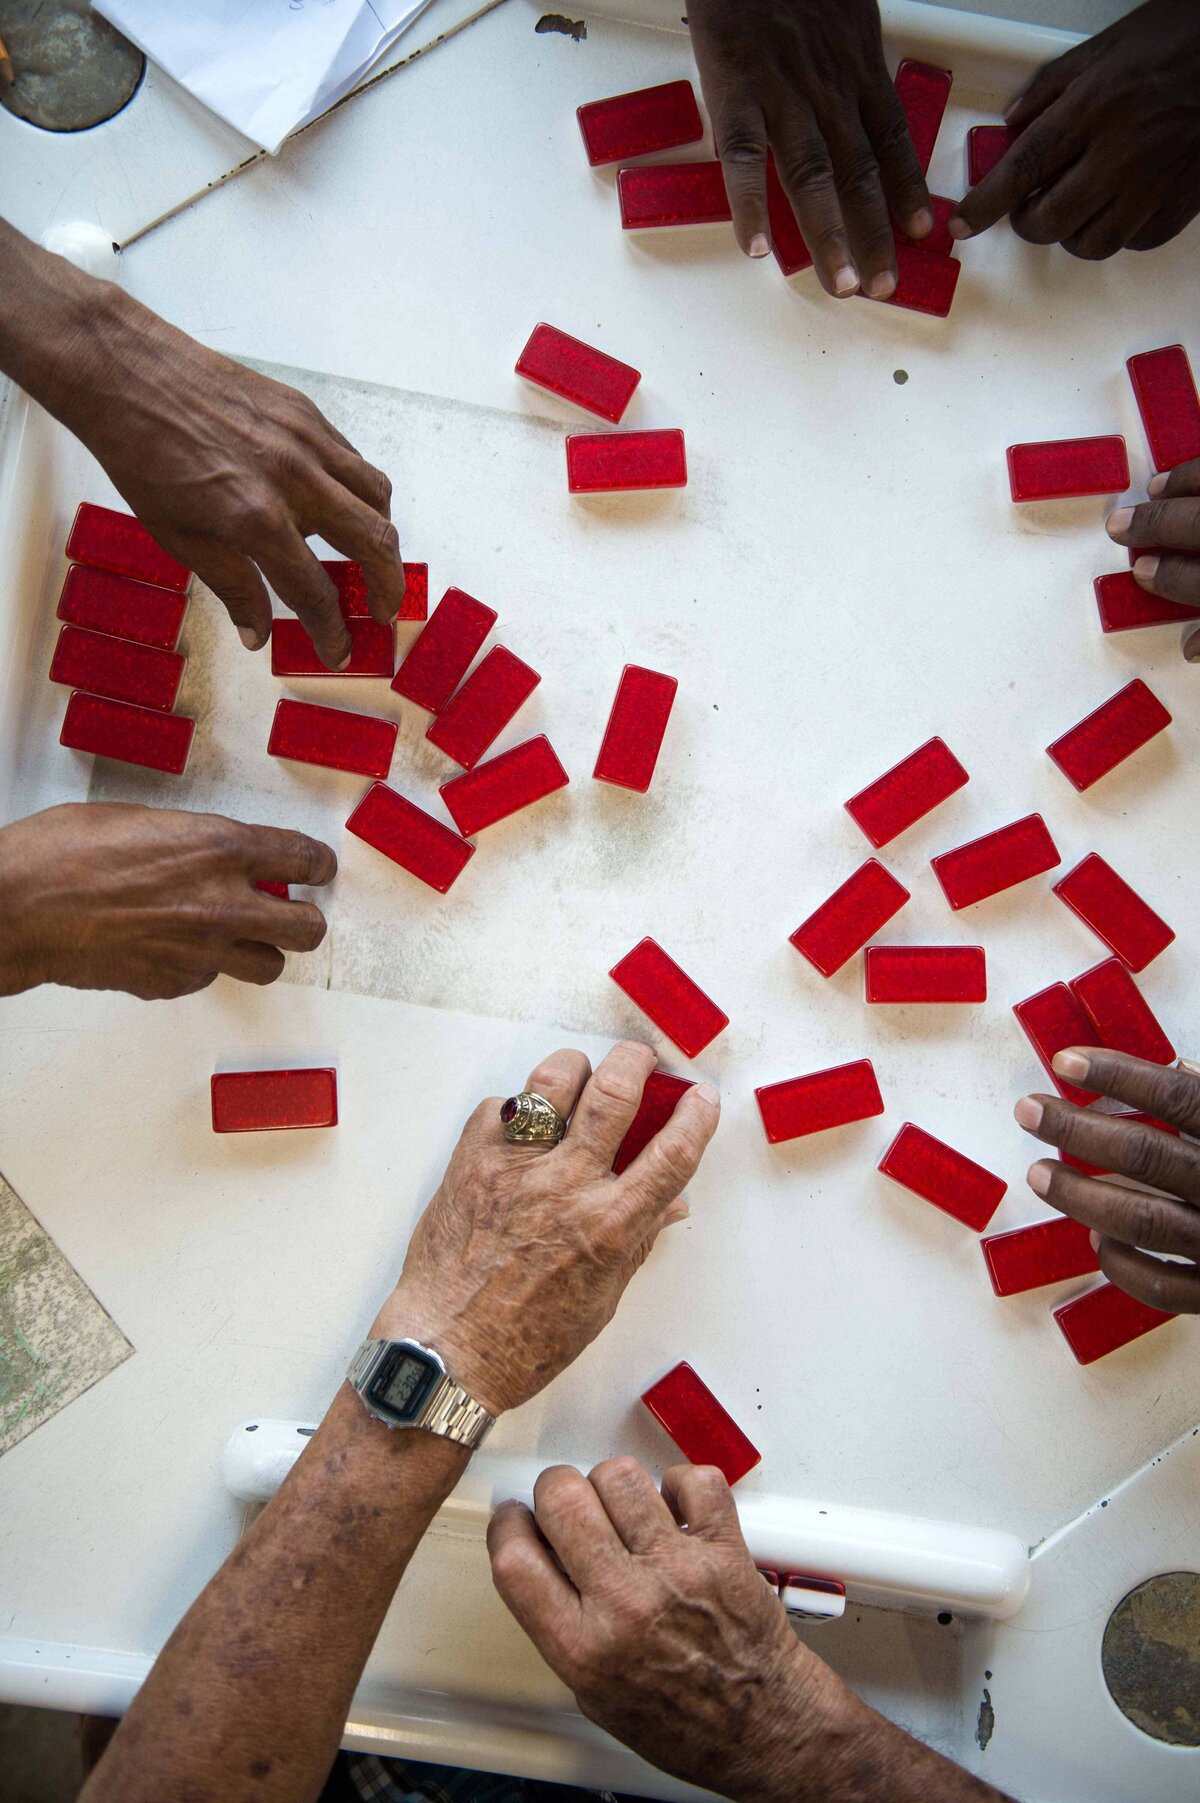 Hands reach for red dominos at Domino Park in Little Havana